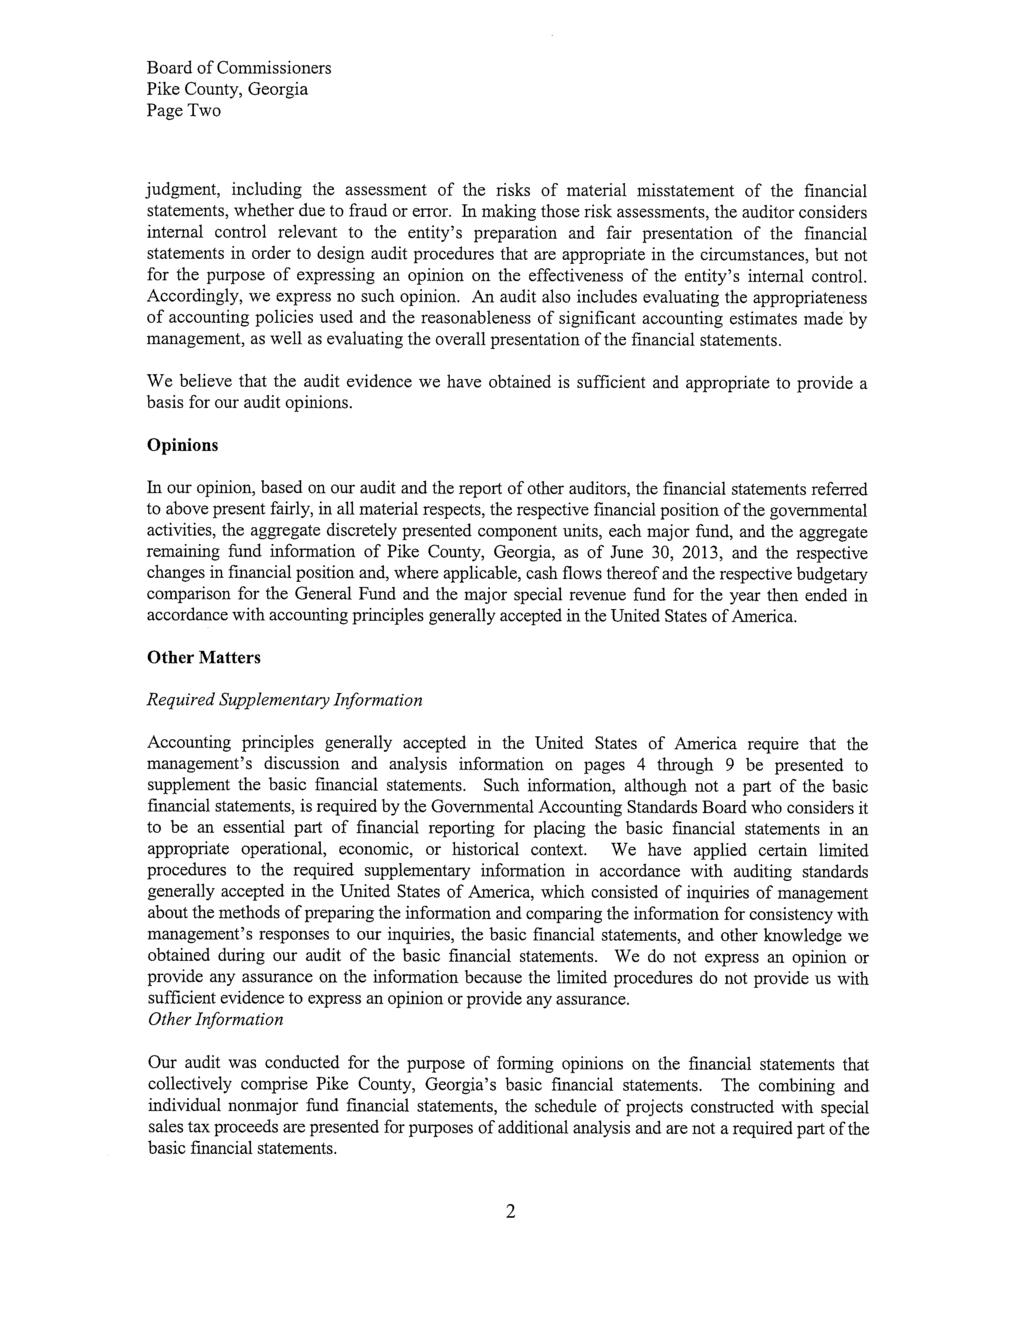 Board of Commissioners Pike County, Georgia Page Two judgment, including the assessment of the risks of material misstatement of the financial statements, whether due to fraud or error.